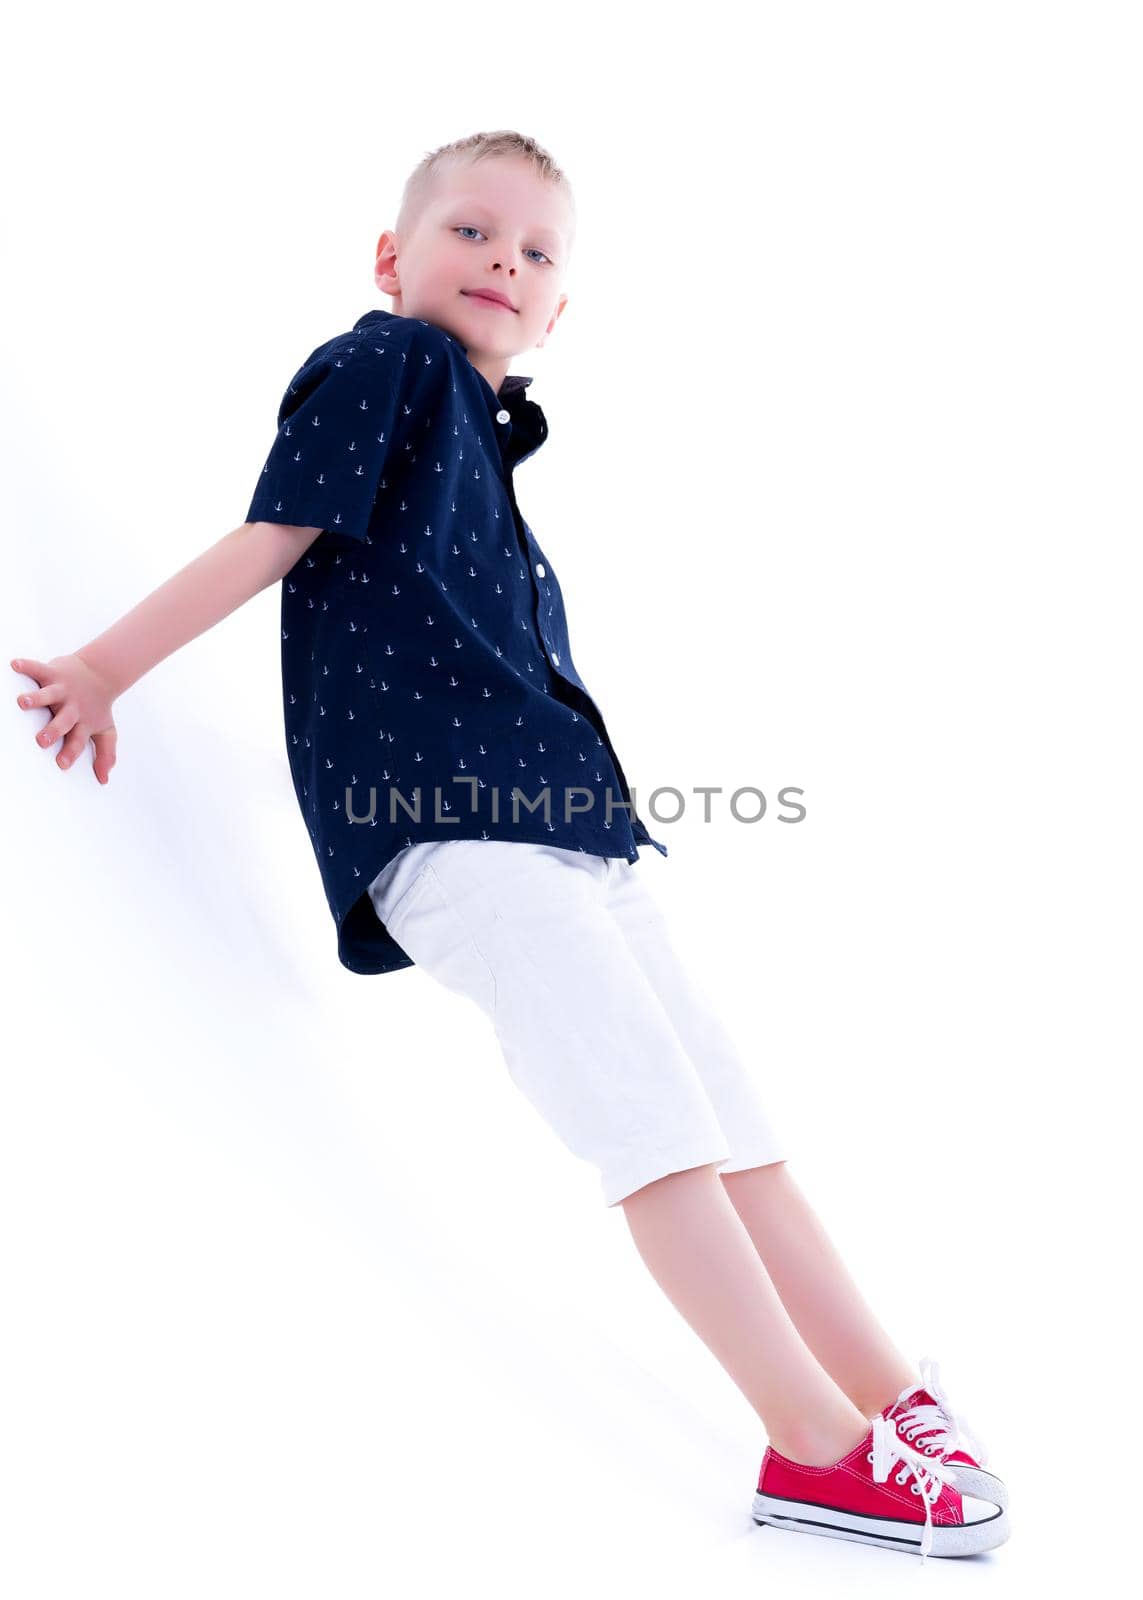 Cute little boy studio portrait on white cyclorama. The concept of a happy childhood. Isolated on white background